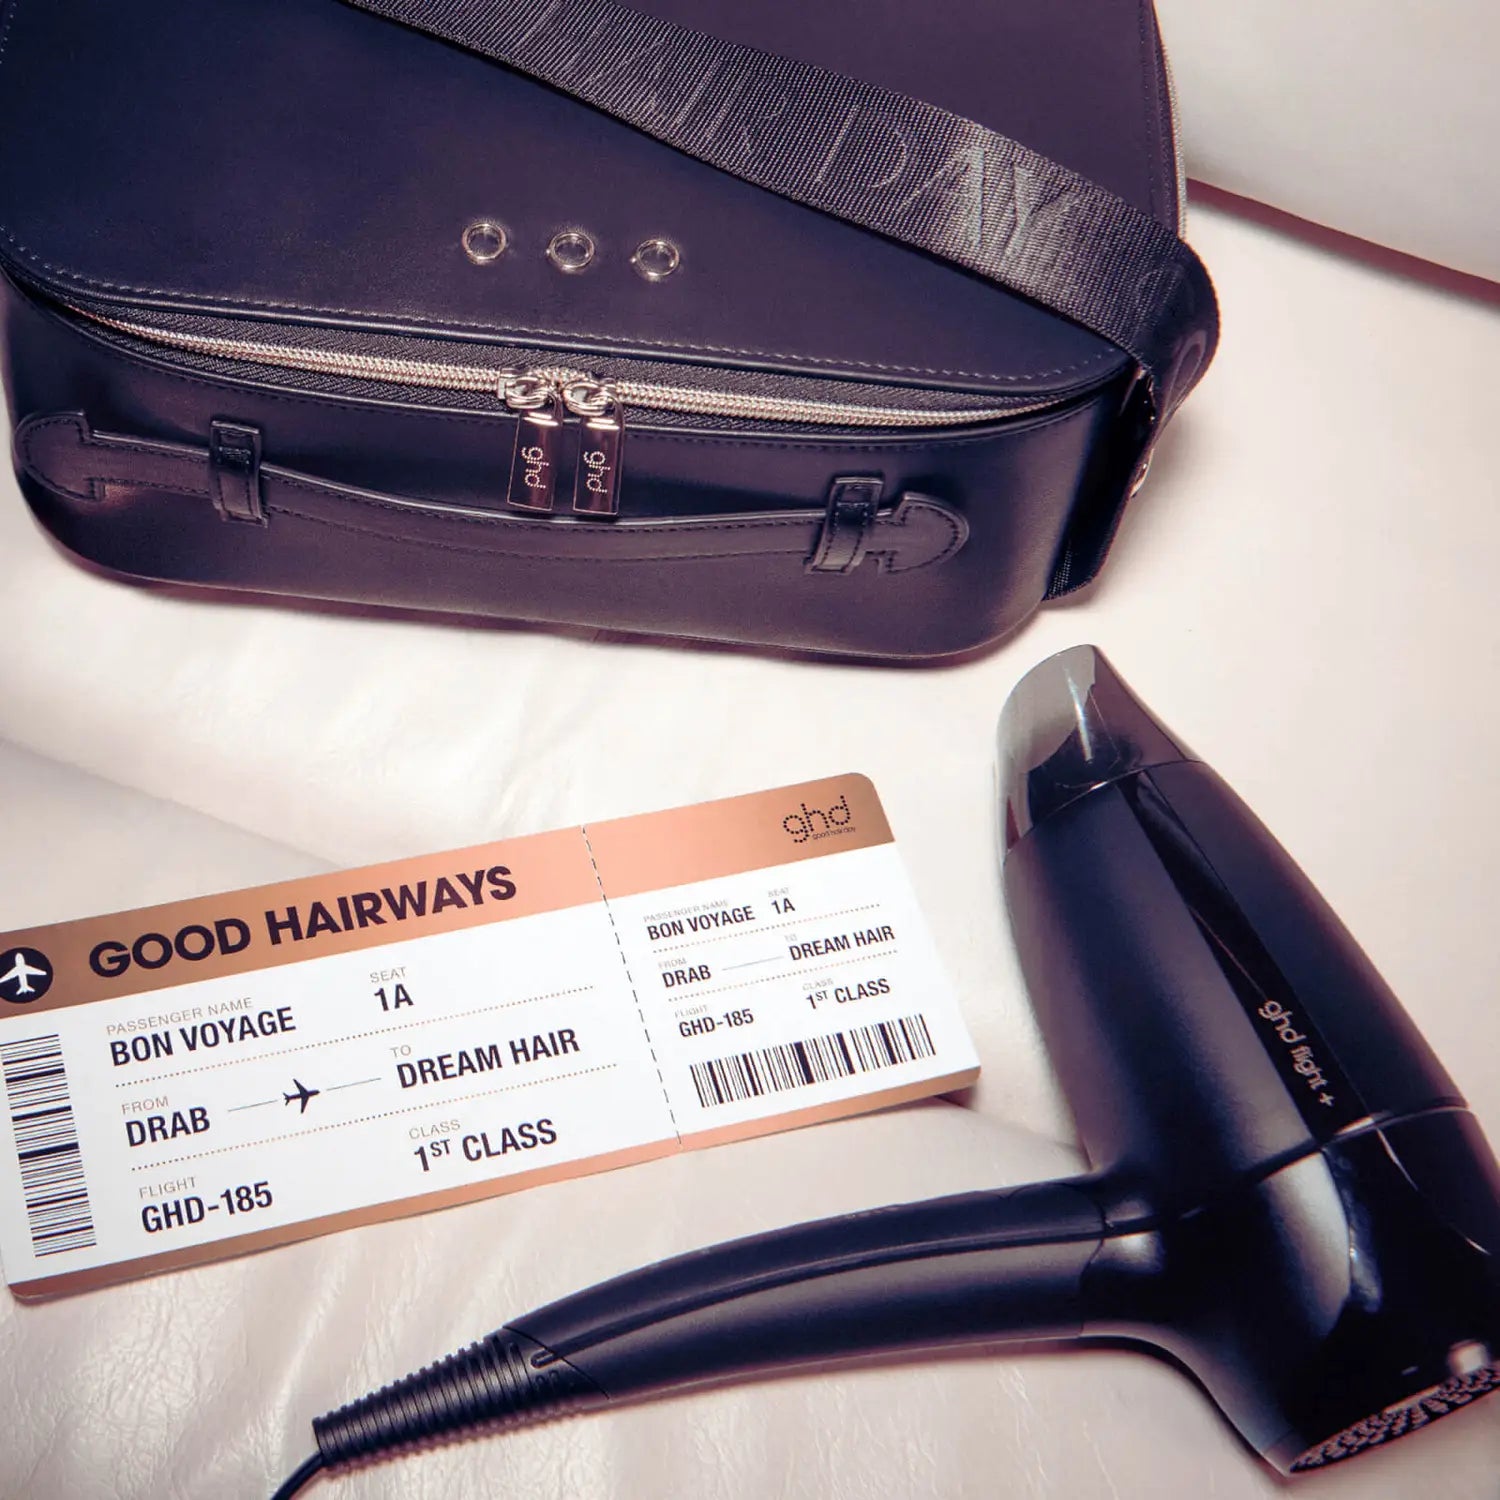 ghd Flight+ Travel Hair Dryer, lifestyle picture